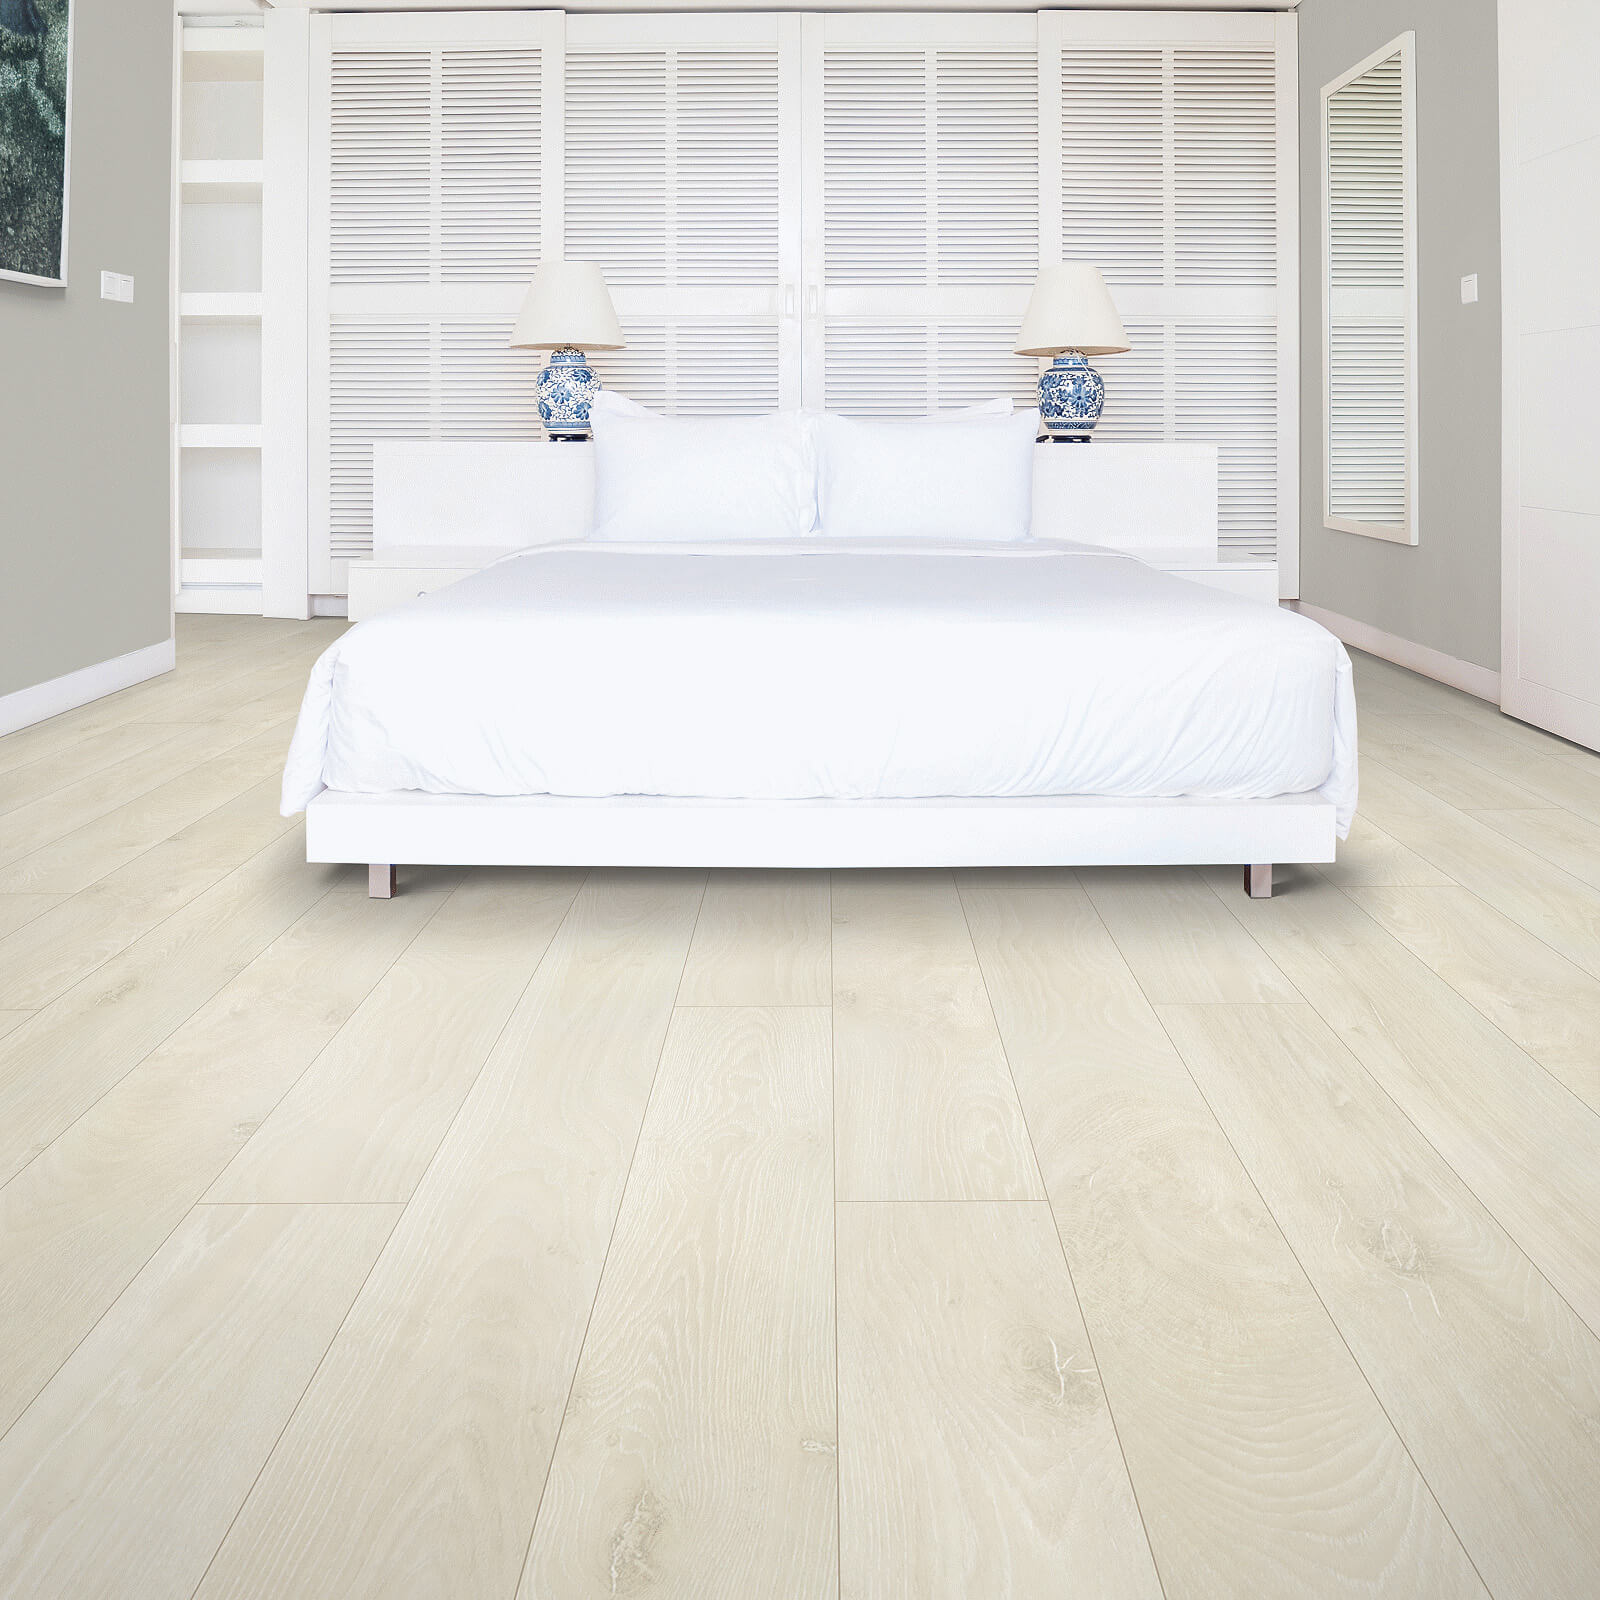 Bedroom Interior | Carpet And Floors For Less